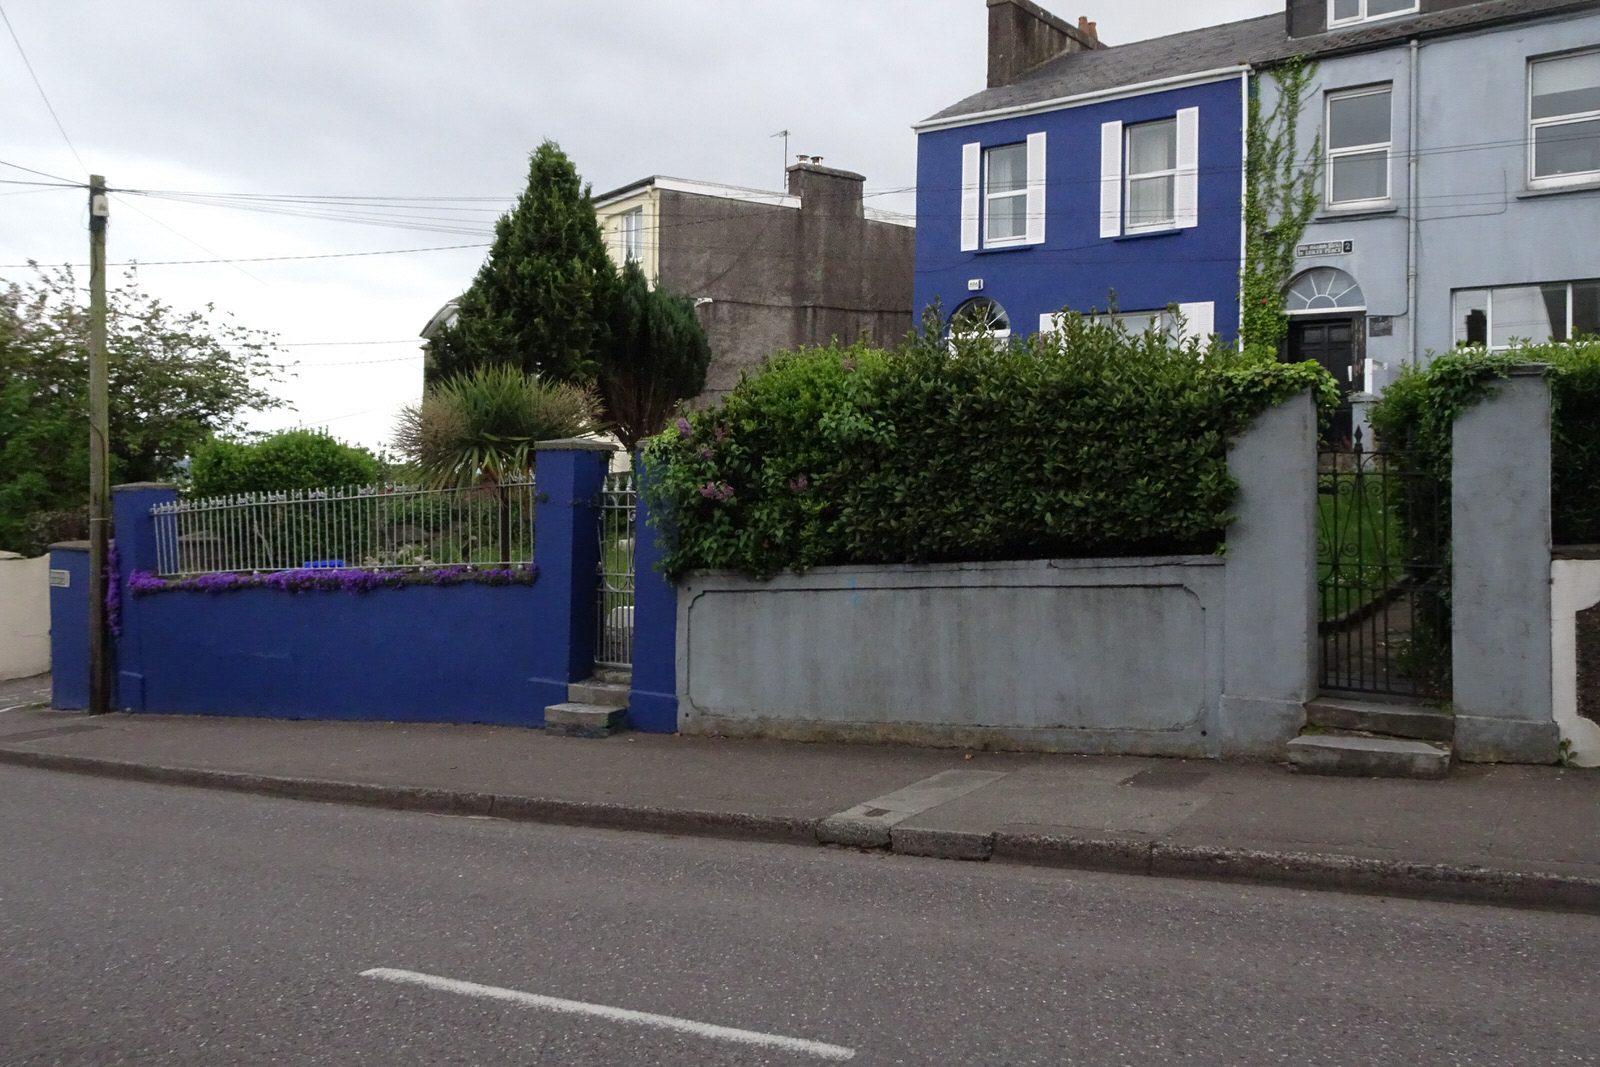 A WALK ALONG SUMMERHILL NORTH [IN CORK EVERYWHERE IS UPHILL OR DOWNHILL]-225841-1